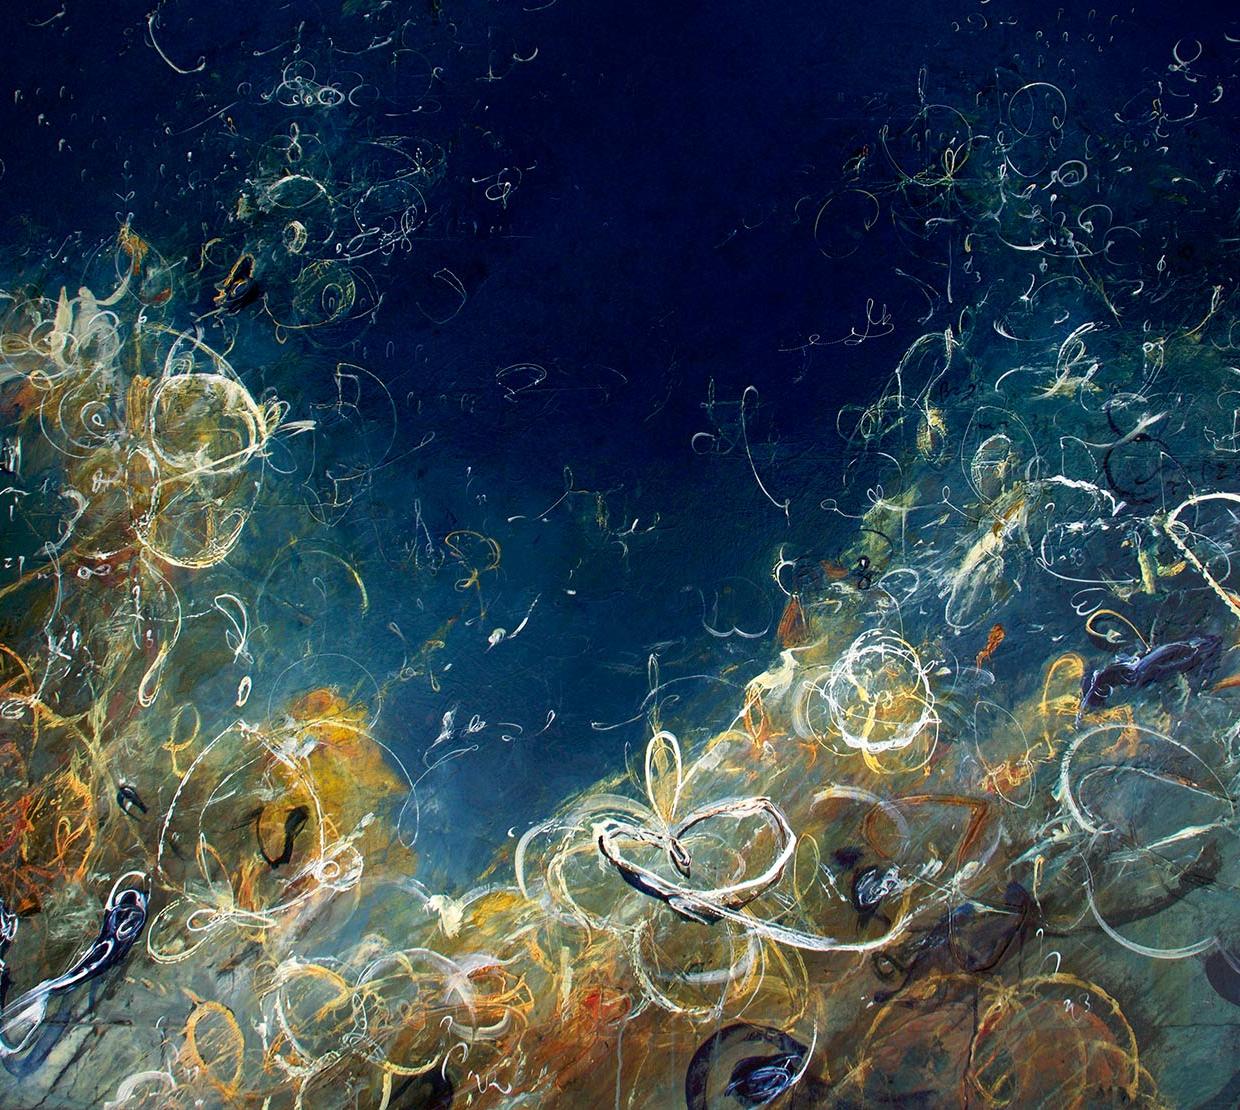 Michael Schultheis painting of ocean shore made of mathematical imagery